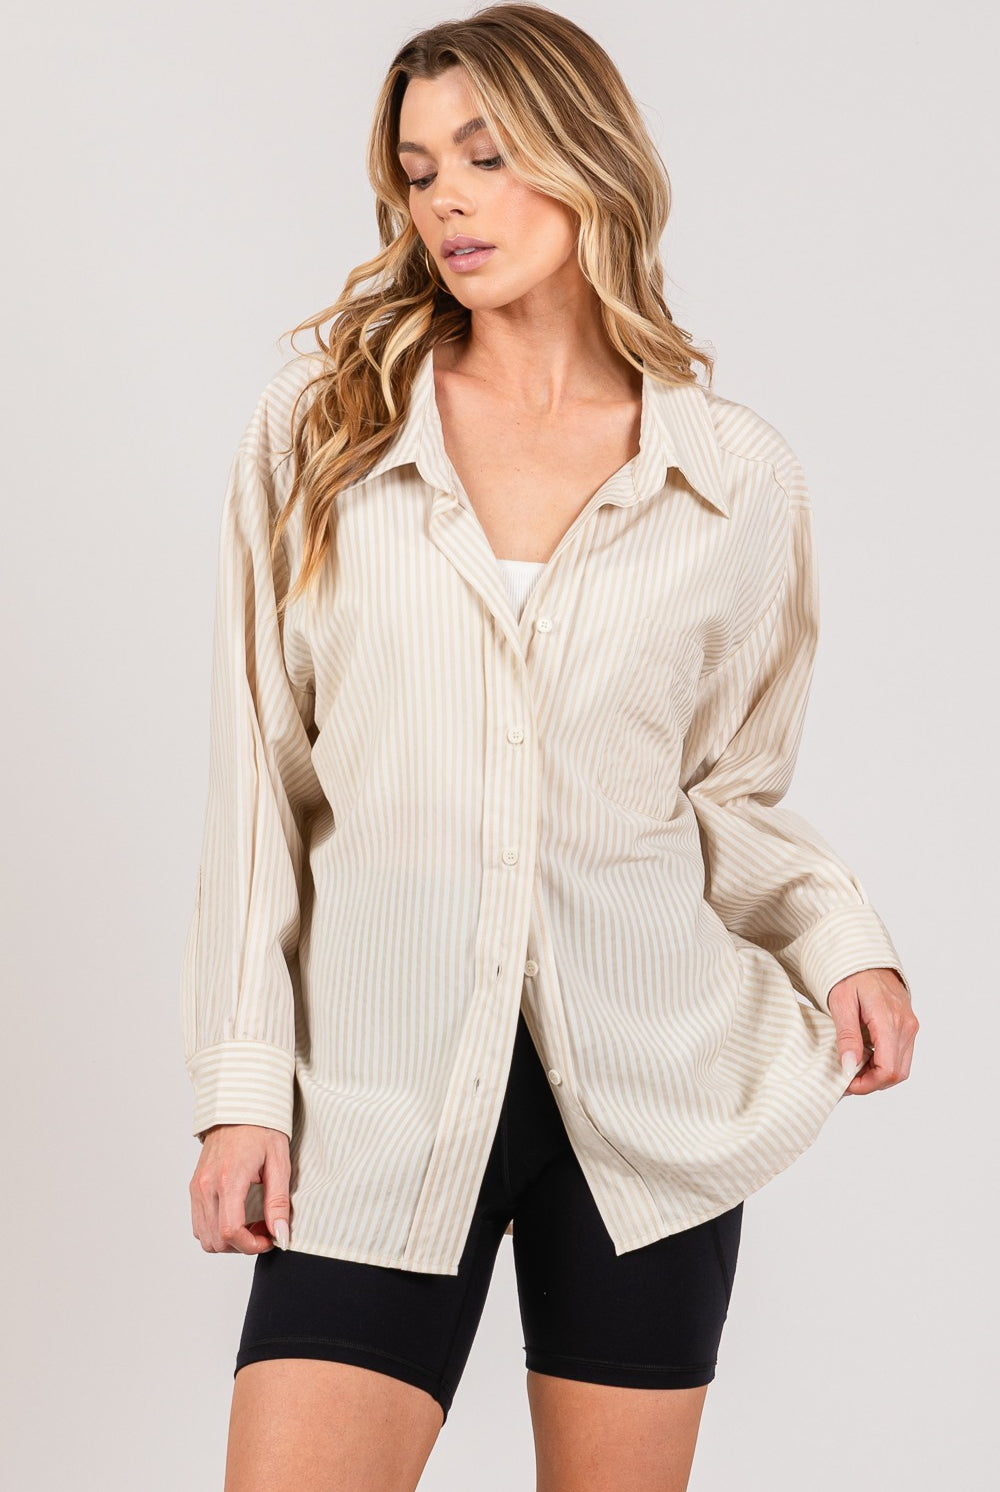 A woman is showcasing a chic beige striped long sleeve shirt with a casual open front design, layered over a white crop top, and paired with black biker shorts. The shirt features a classic collar, a chest pocket, and buttoned cuffs, highlighting a versatile and trendy piece from GemThreads Boutique.